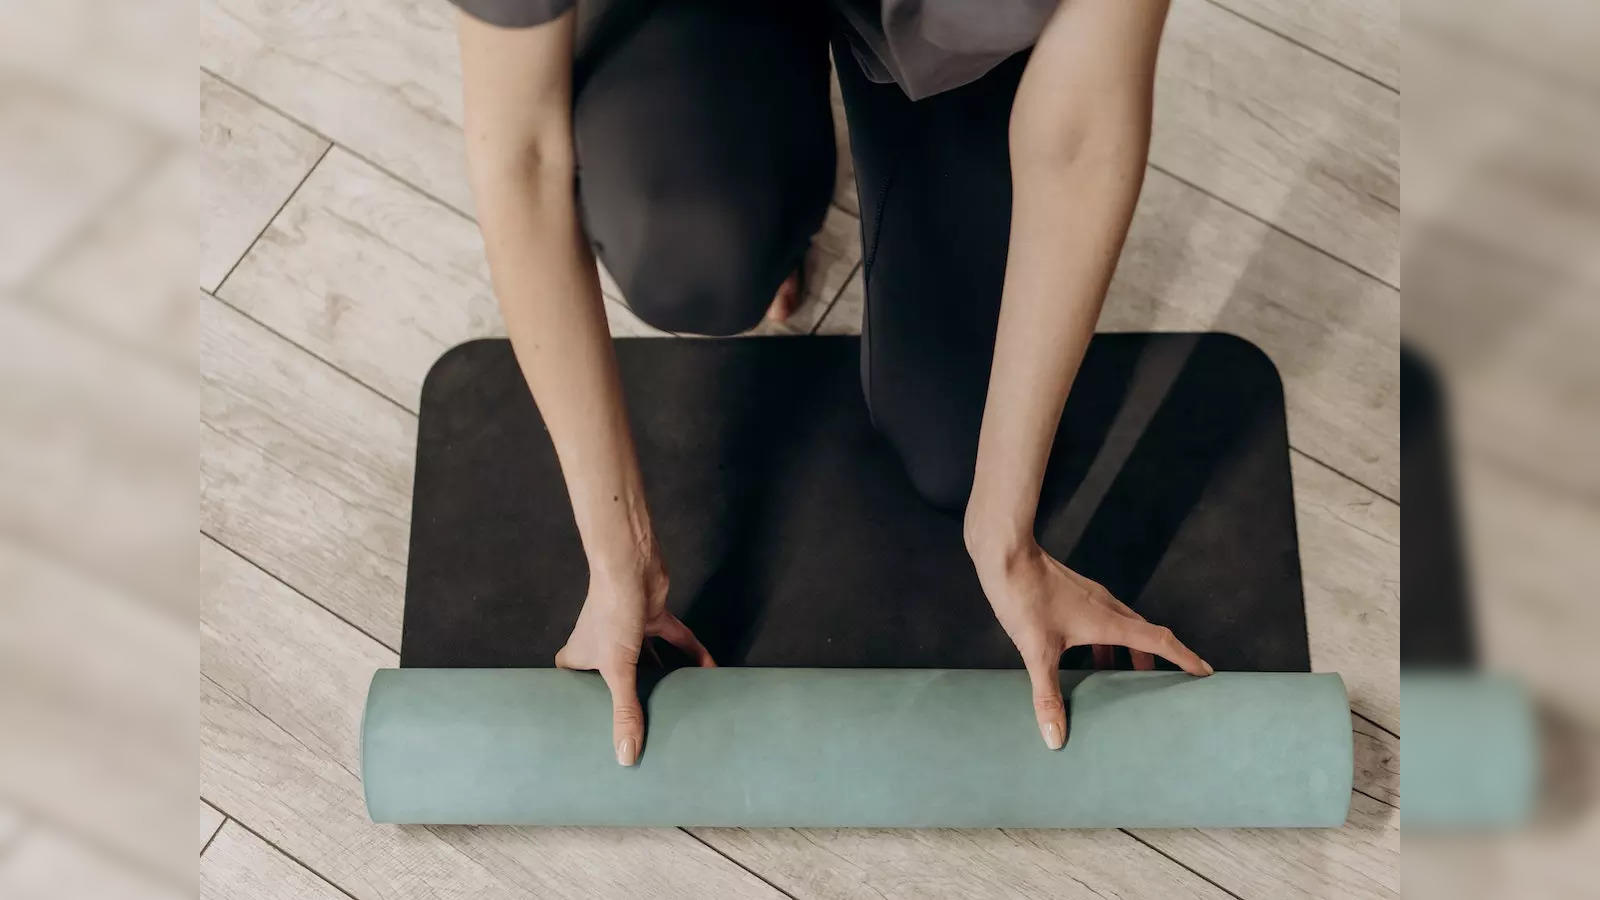 Yoga mat thickness guide: pick the right one for your practice